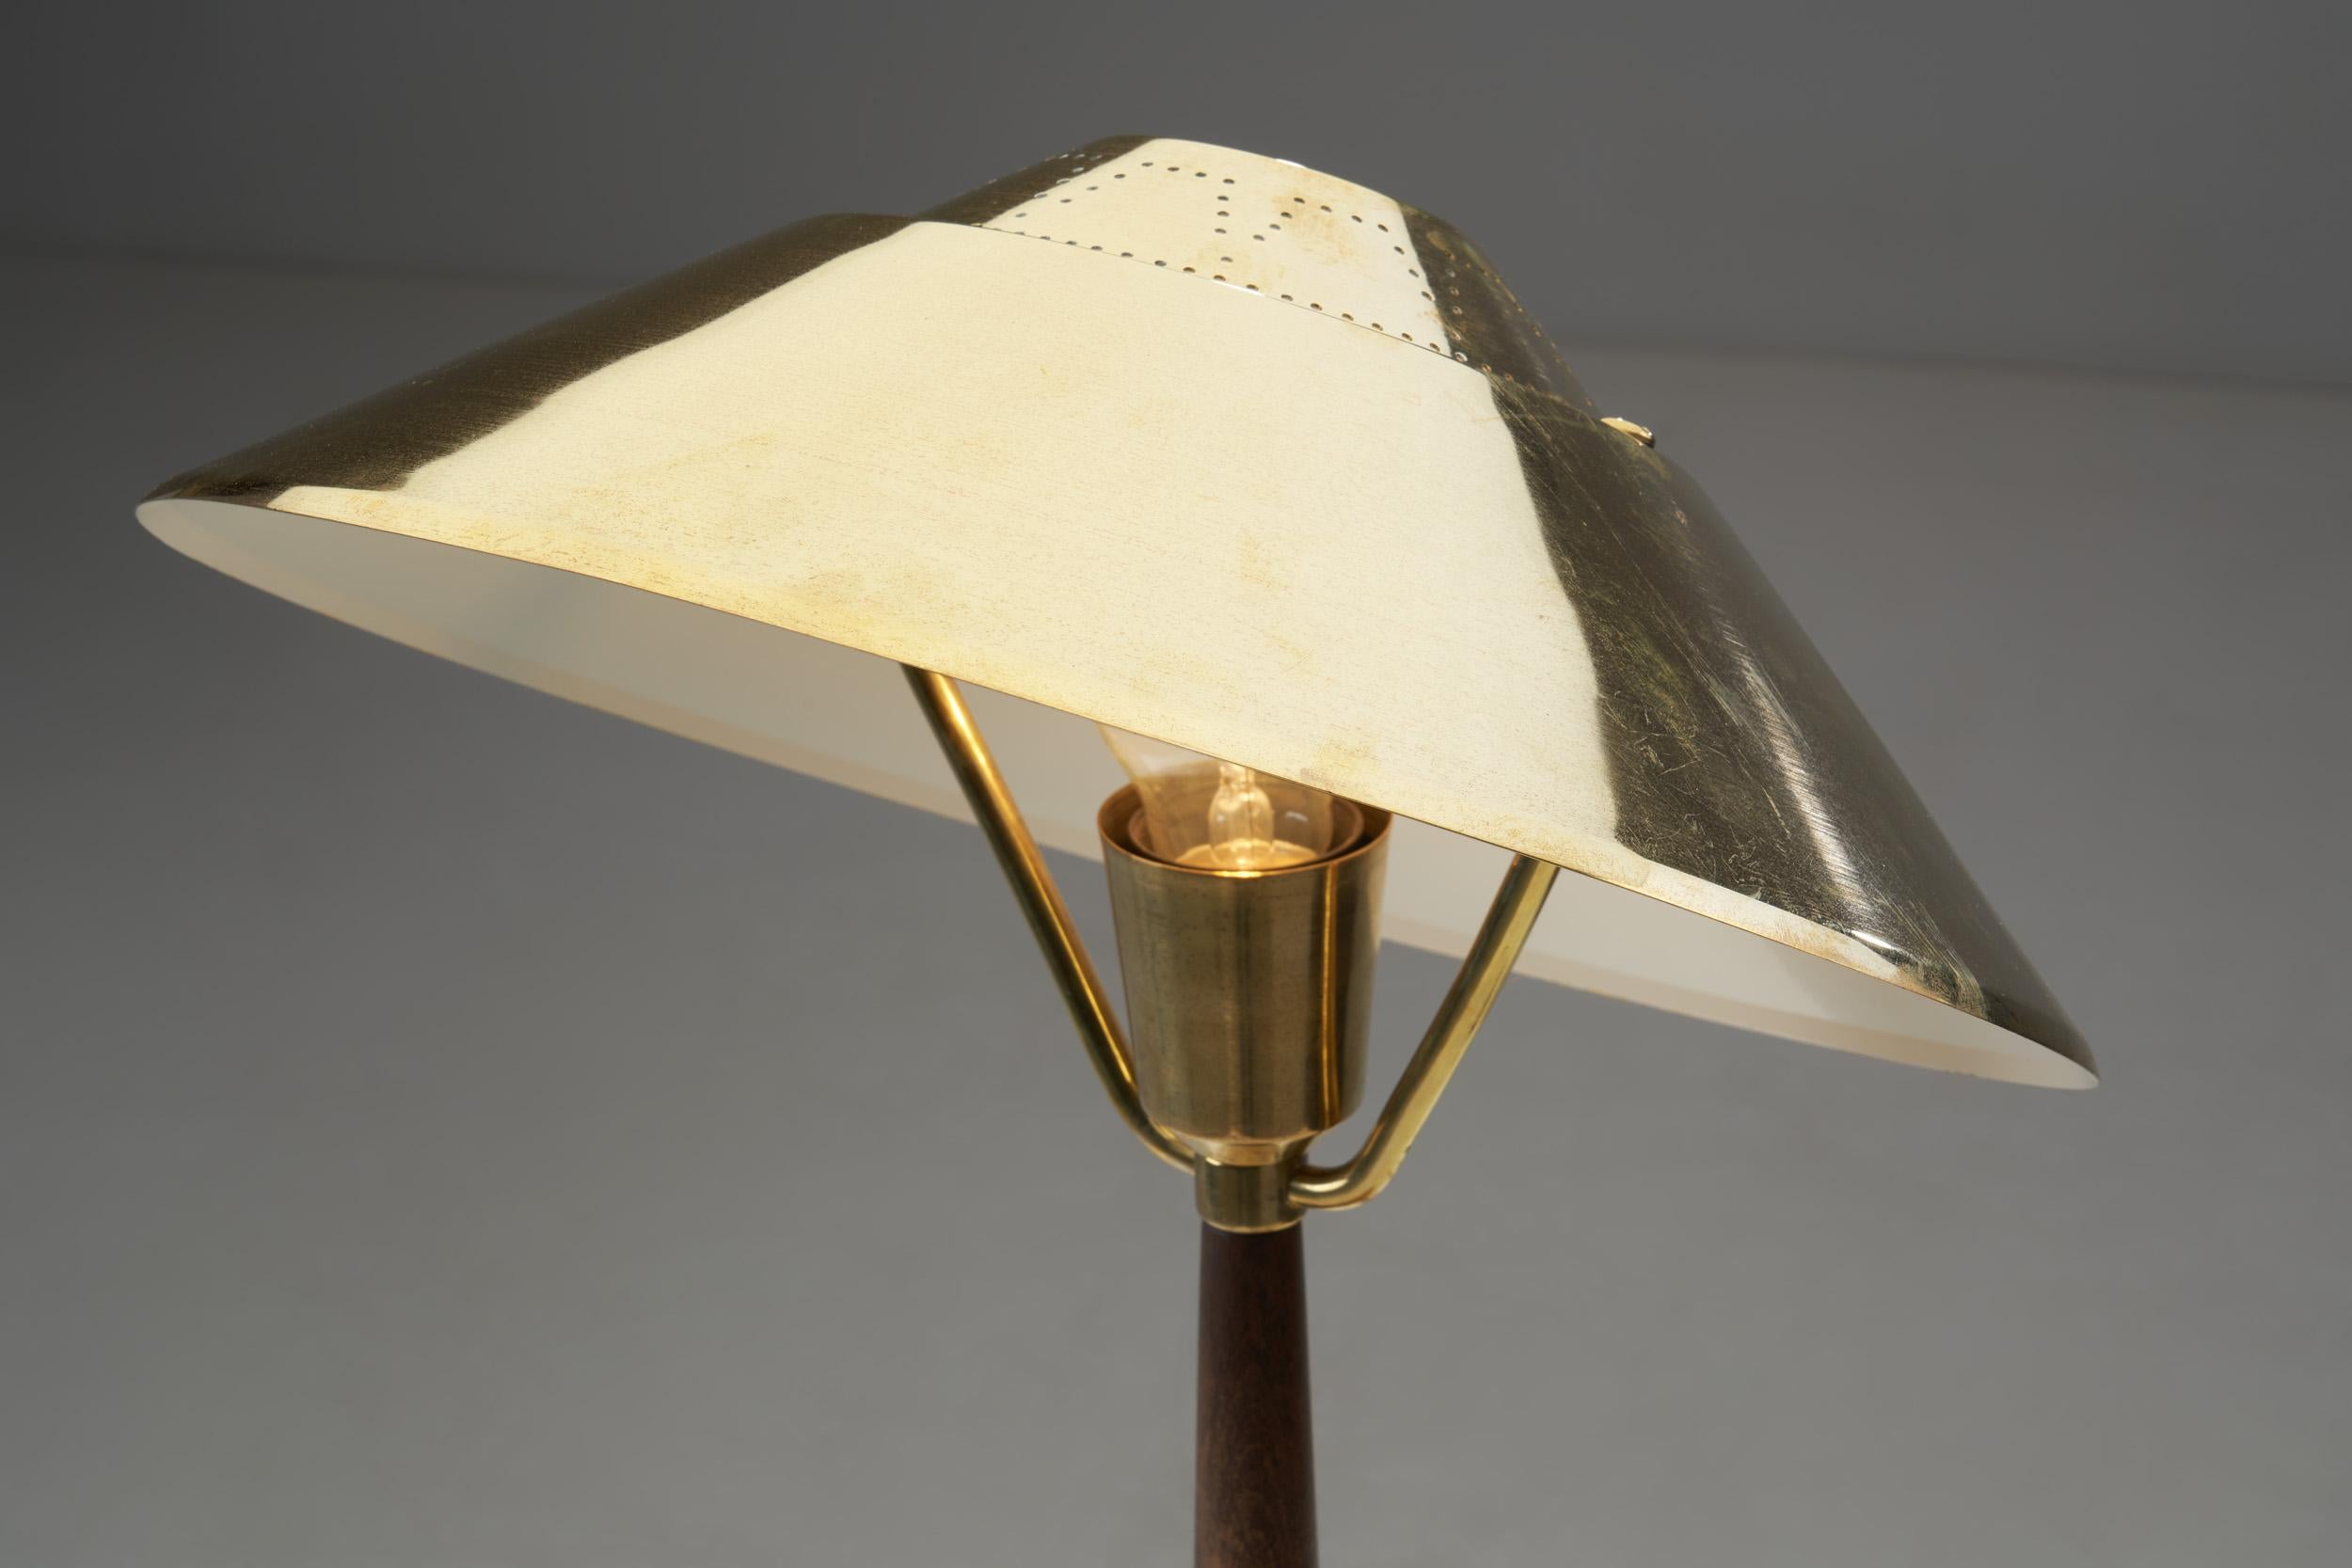 AB E. Hansson & Co. Brass Table Lamp with Adjustable Shade, Sweden 1950s For Sale 3